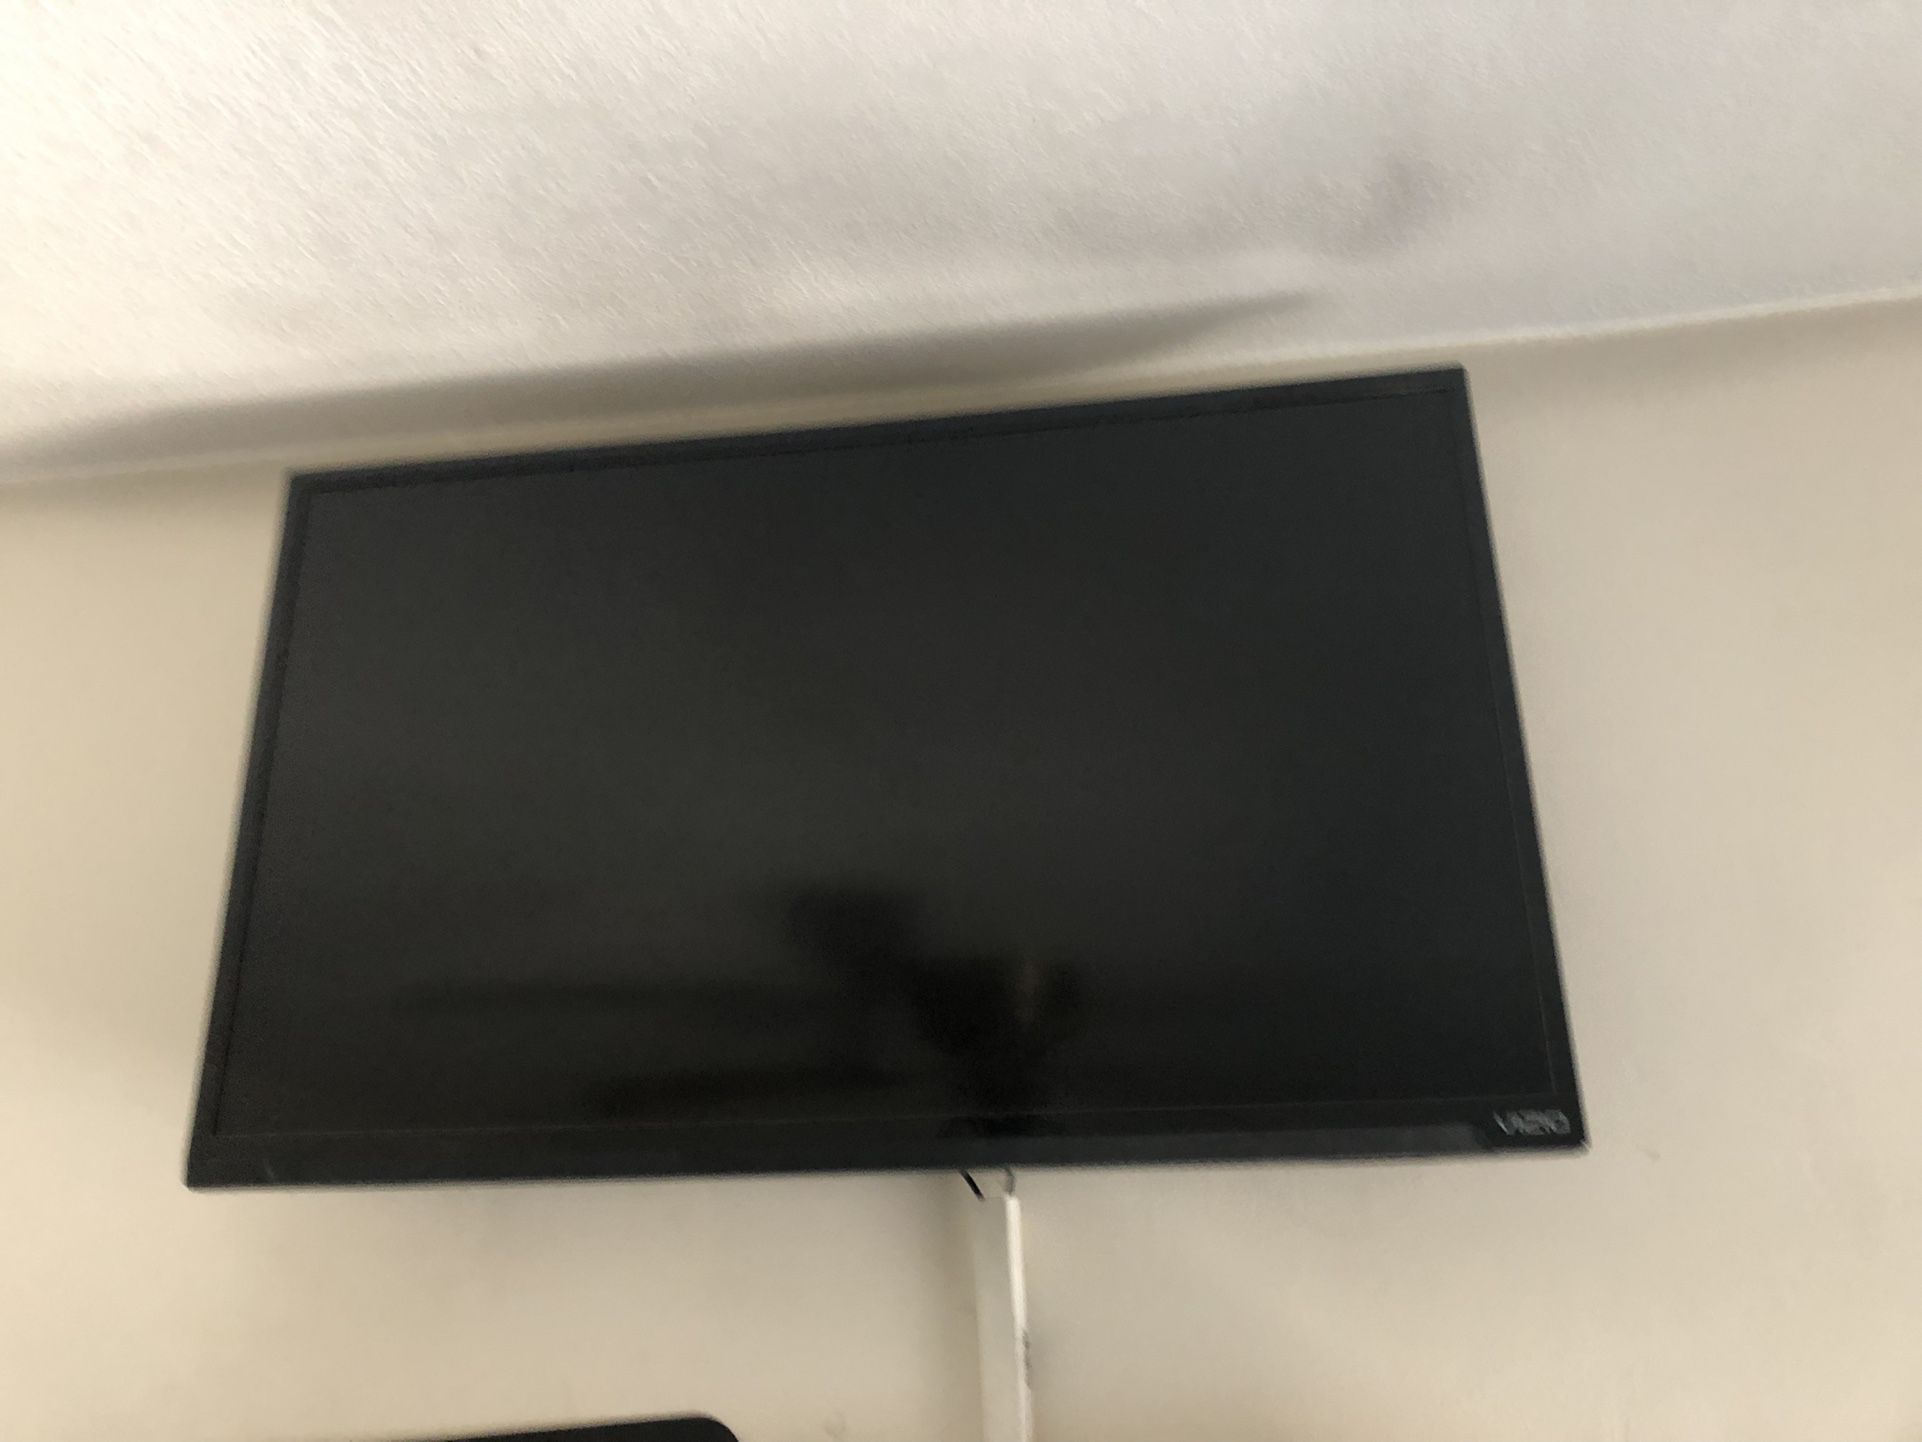 32” Vizio Tv With Wall Holderwith Chromecast (as Is ) & Antenna 